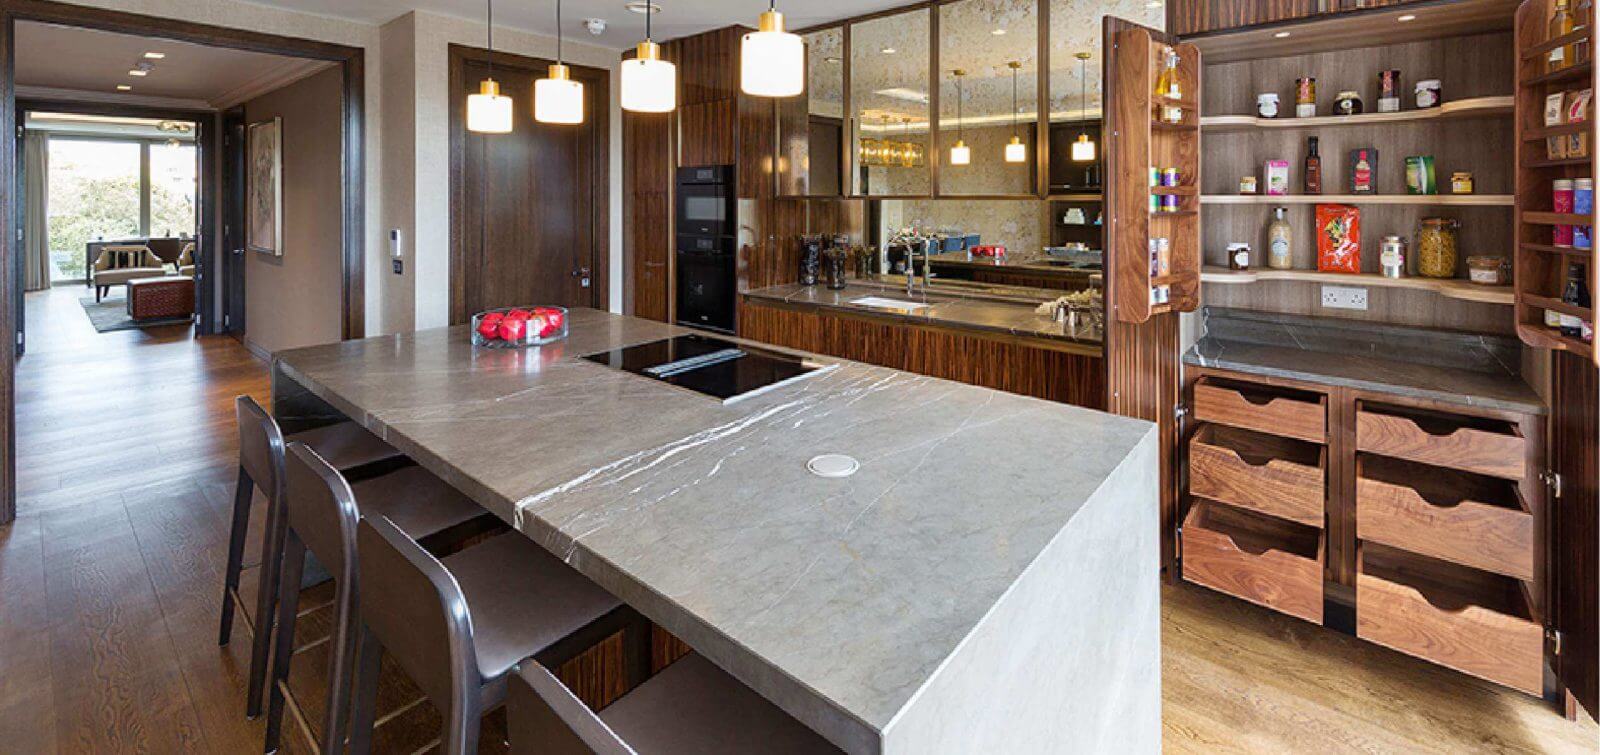 Handcrafted kitchen designed by Goddard Littlefair and handcrafted by O'Connors of Drumleck featuring double solid wood larder unit and Pietra marble counter top